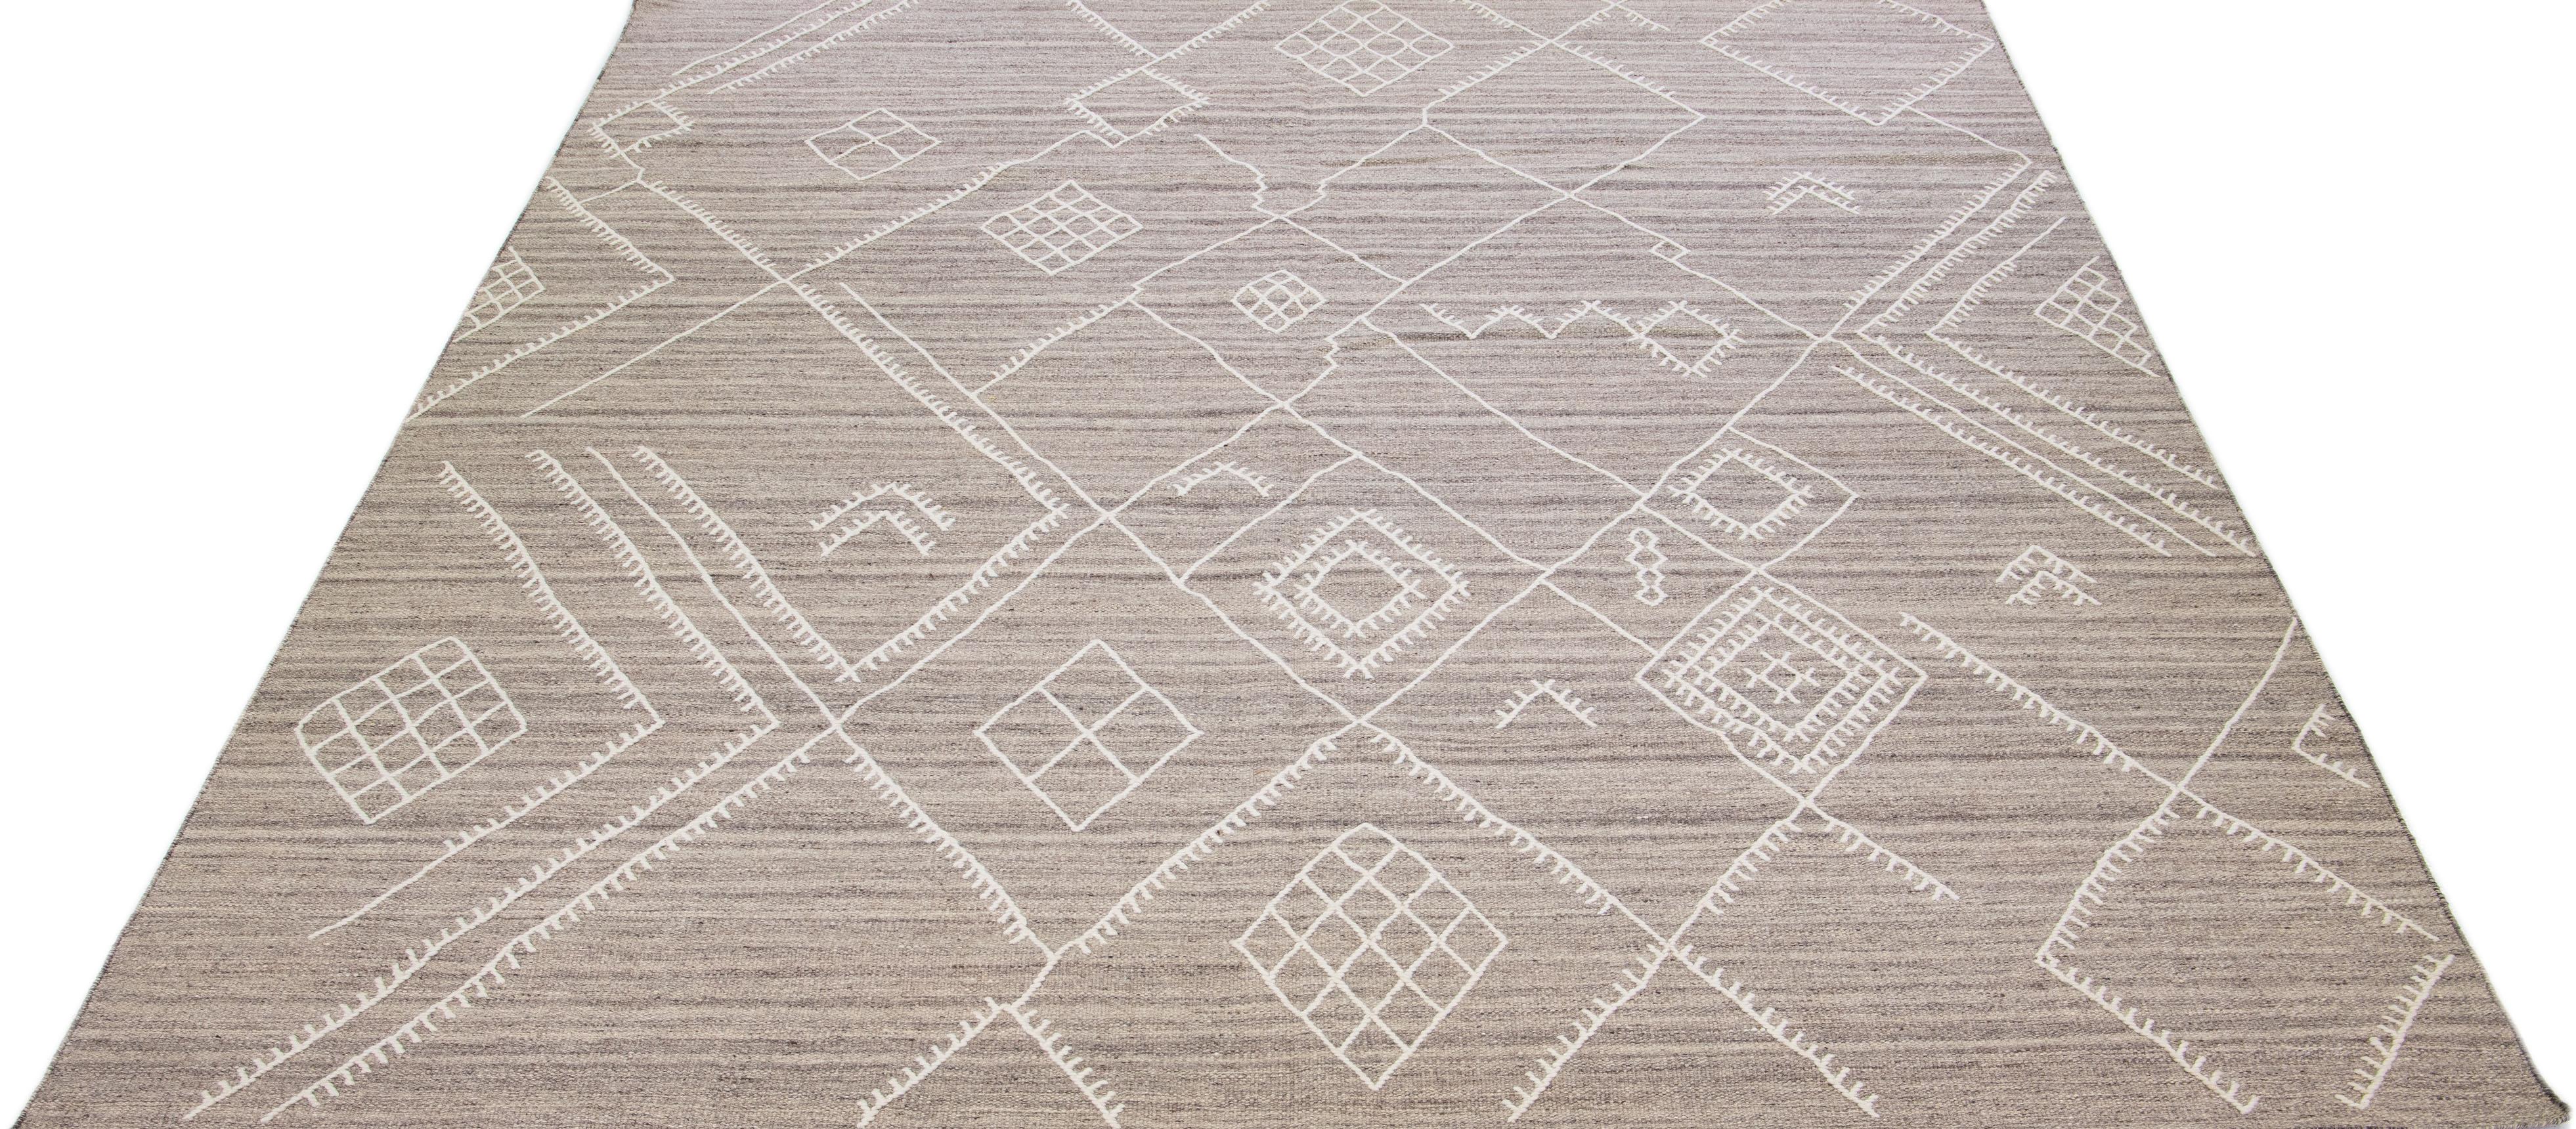 Beautiful kilim handmade wool rug with a beige-taupe color field. This custom modern flatweave rug of our Nantucket collection has white accents and a gorgeous, all-over geometric coastal design.

This rug measures: 10'2